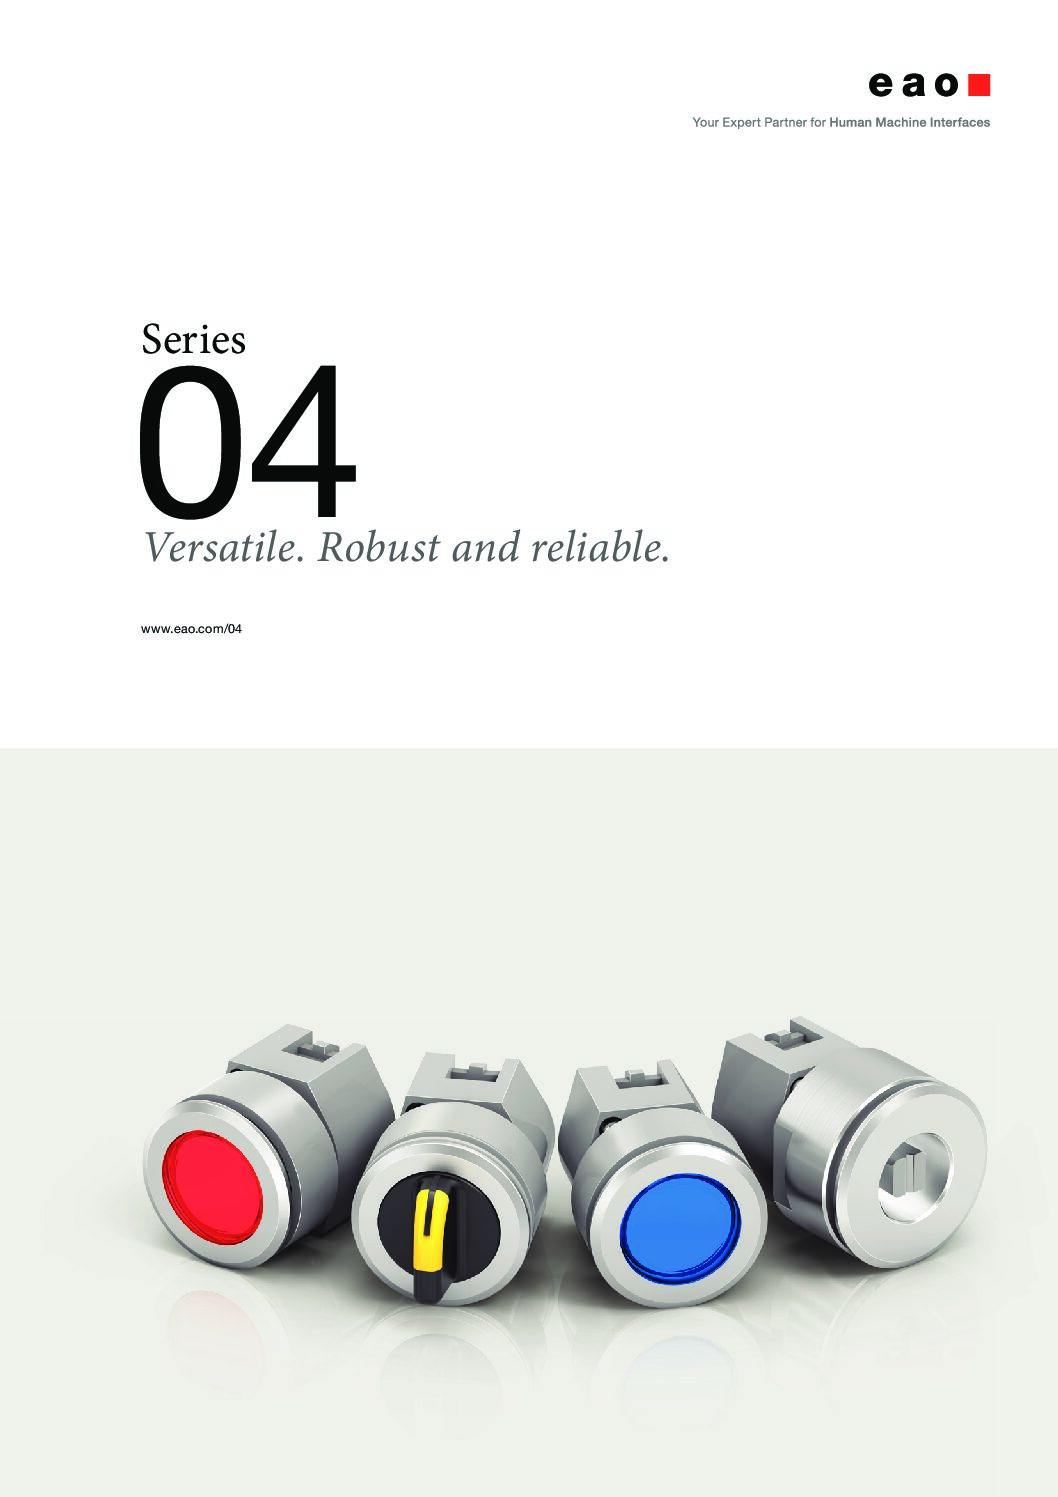 Series 04 – Versatile, Robust and Reliable